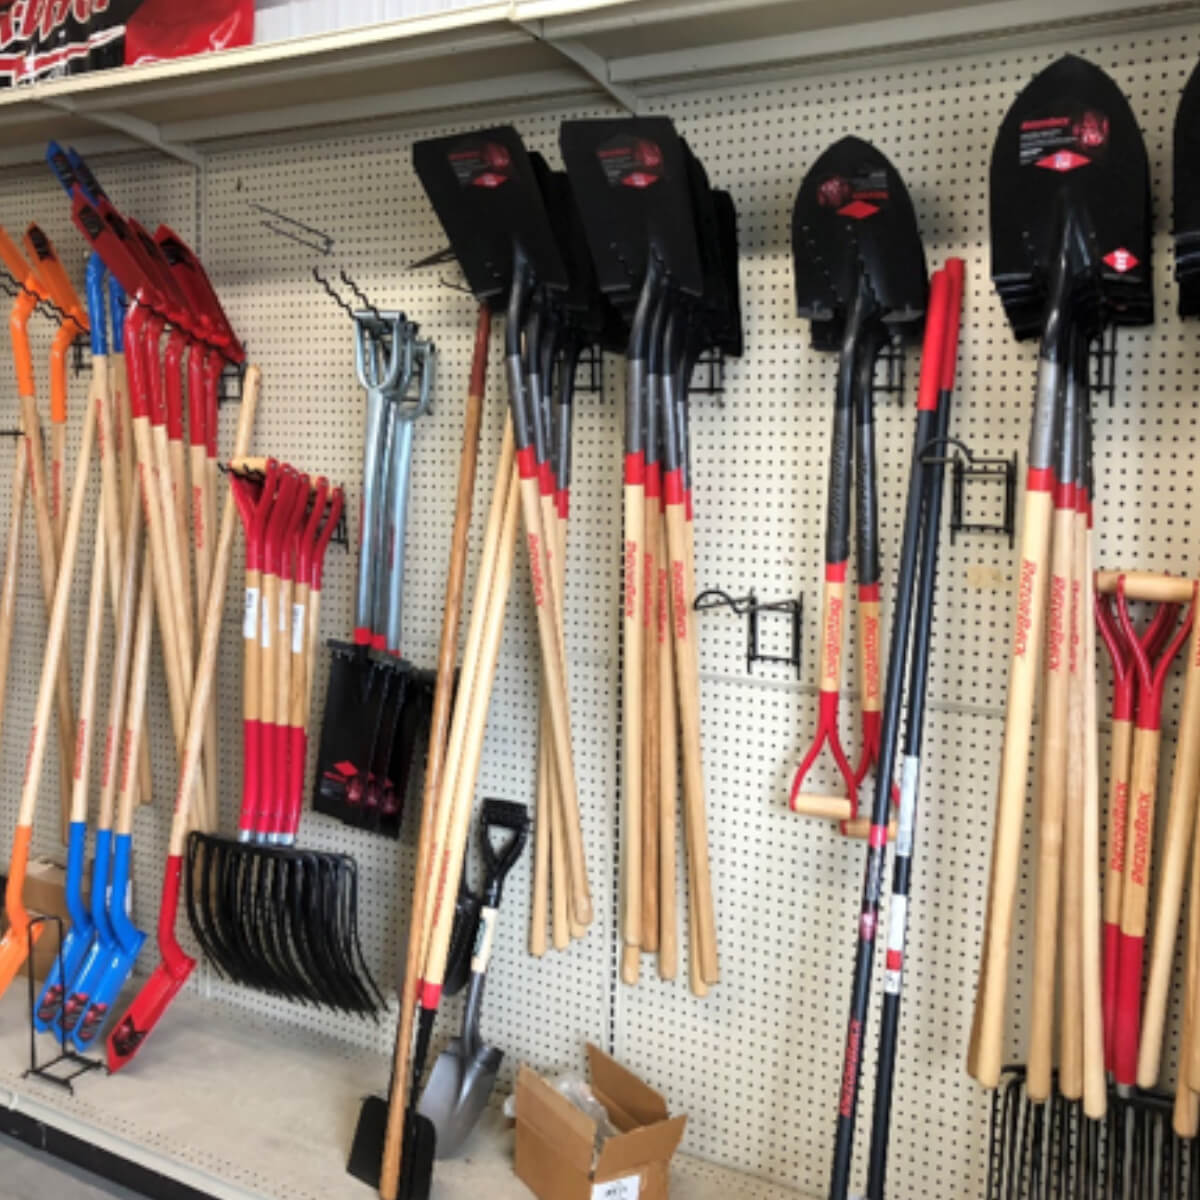 Building Supplies and Hand Tools 1024x1024 - 1